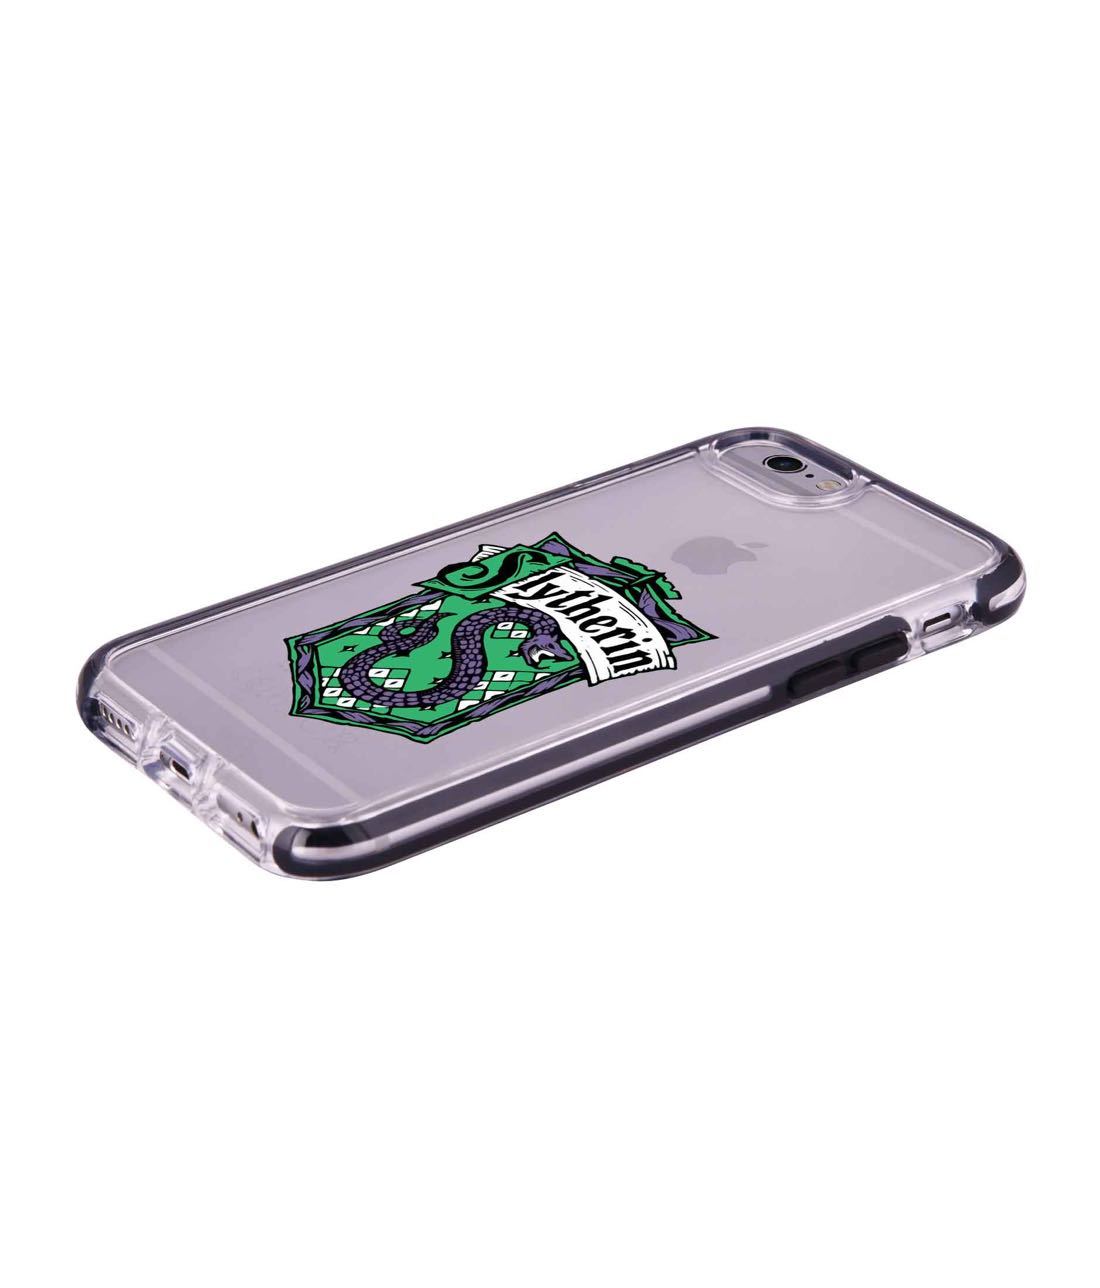 Crest Slytherin - Extreme Phone Case for iPhone 6 Plus